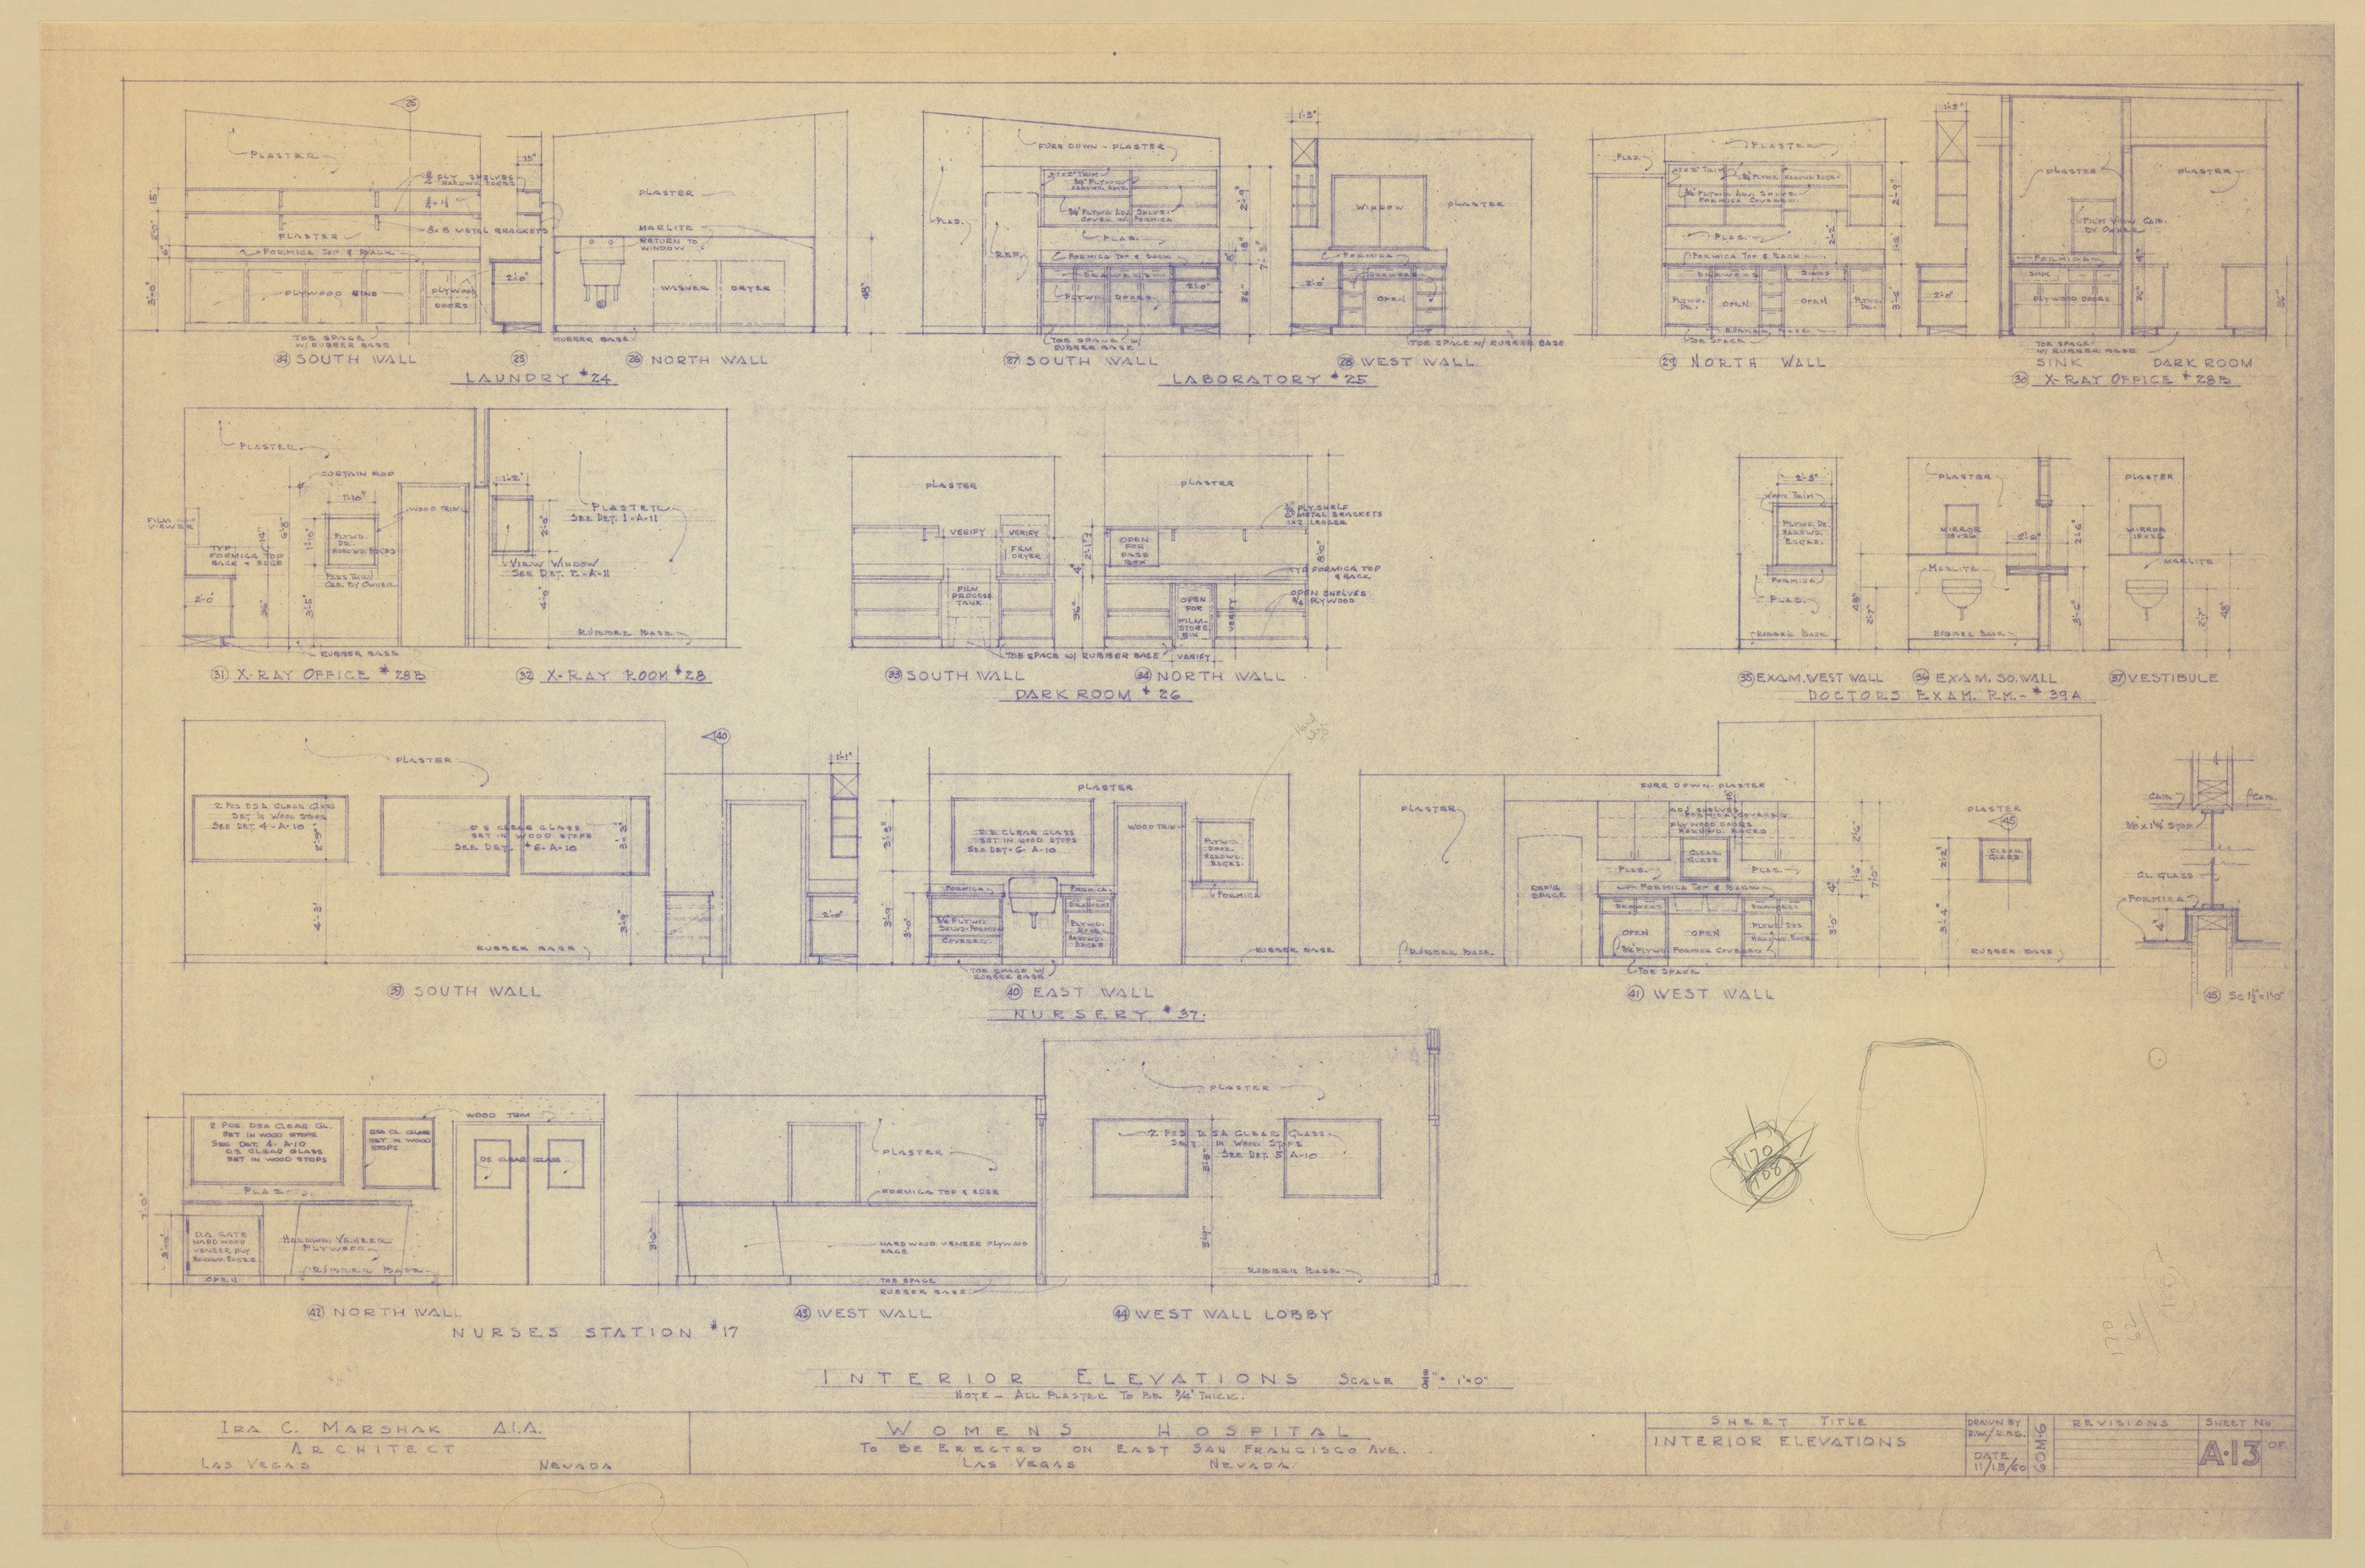 Women's Hospital: architectural, mechanical, electrical, plumbing drawings, image 004